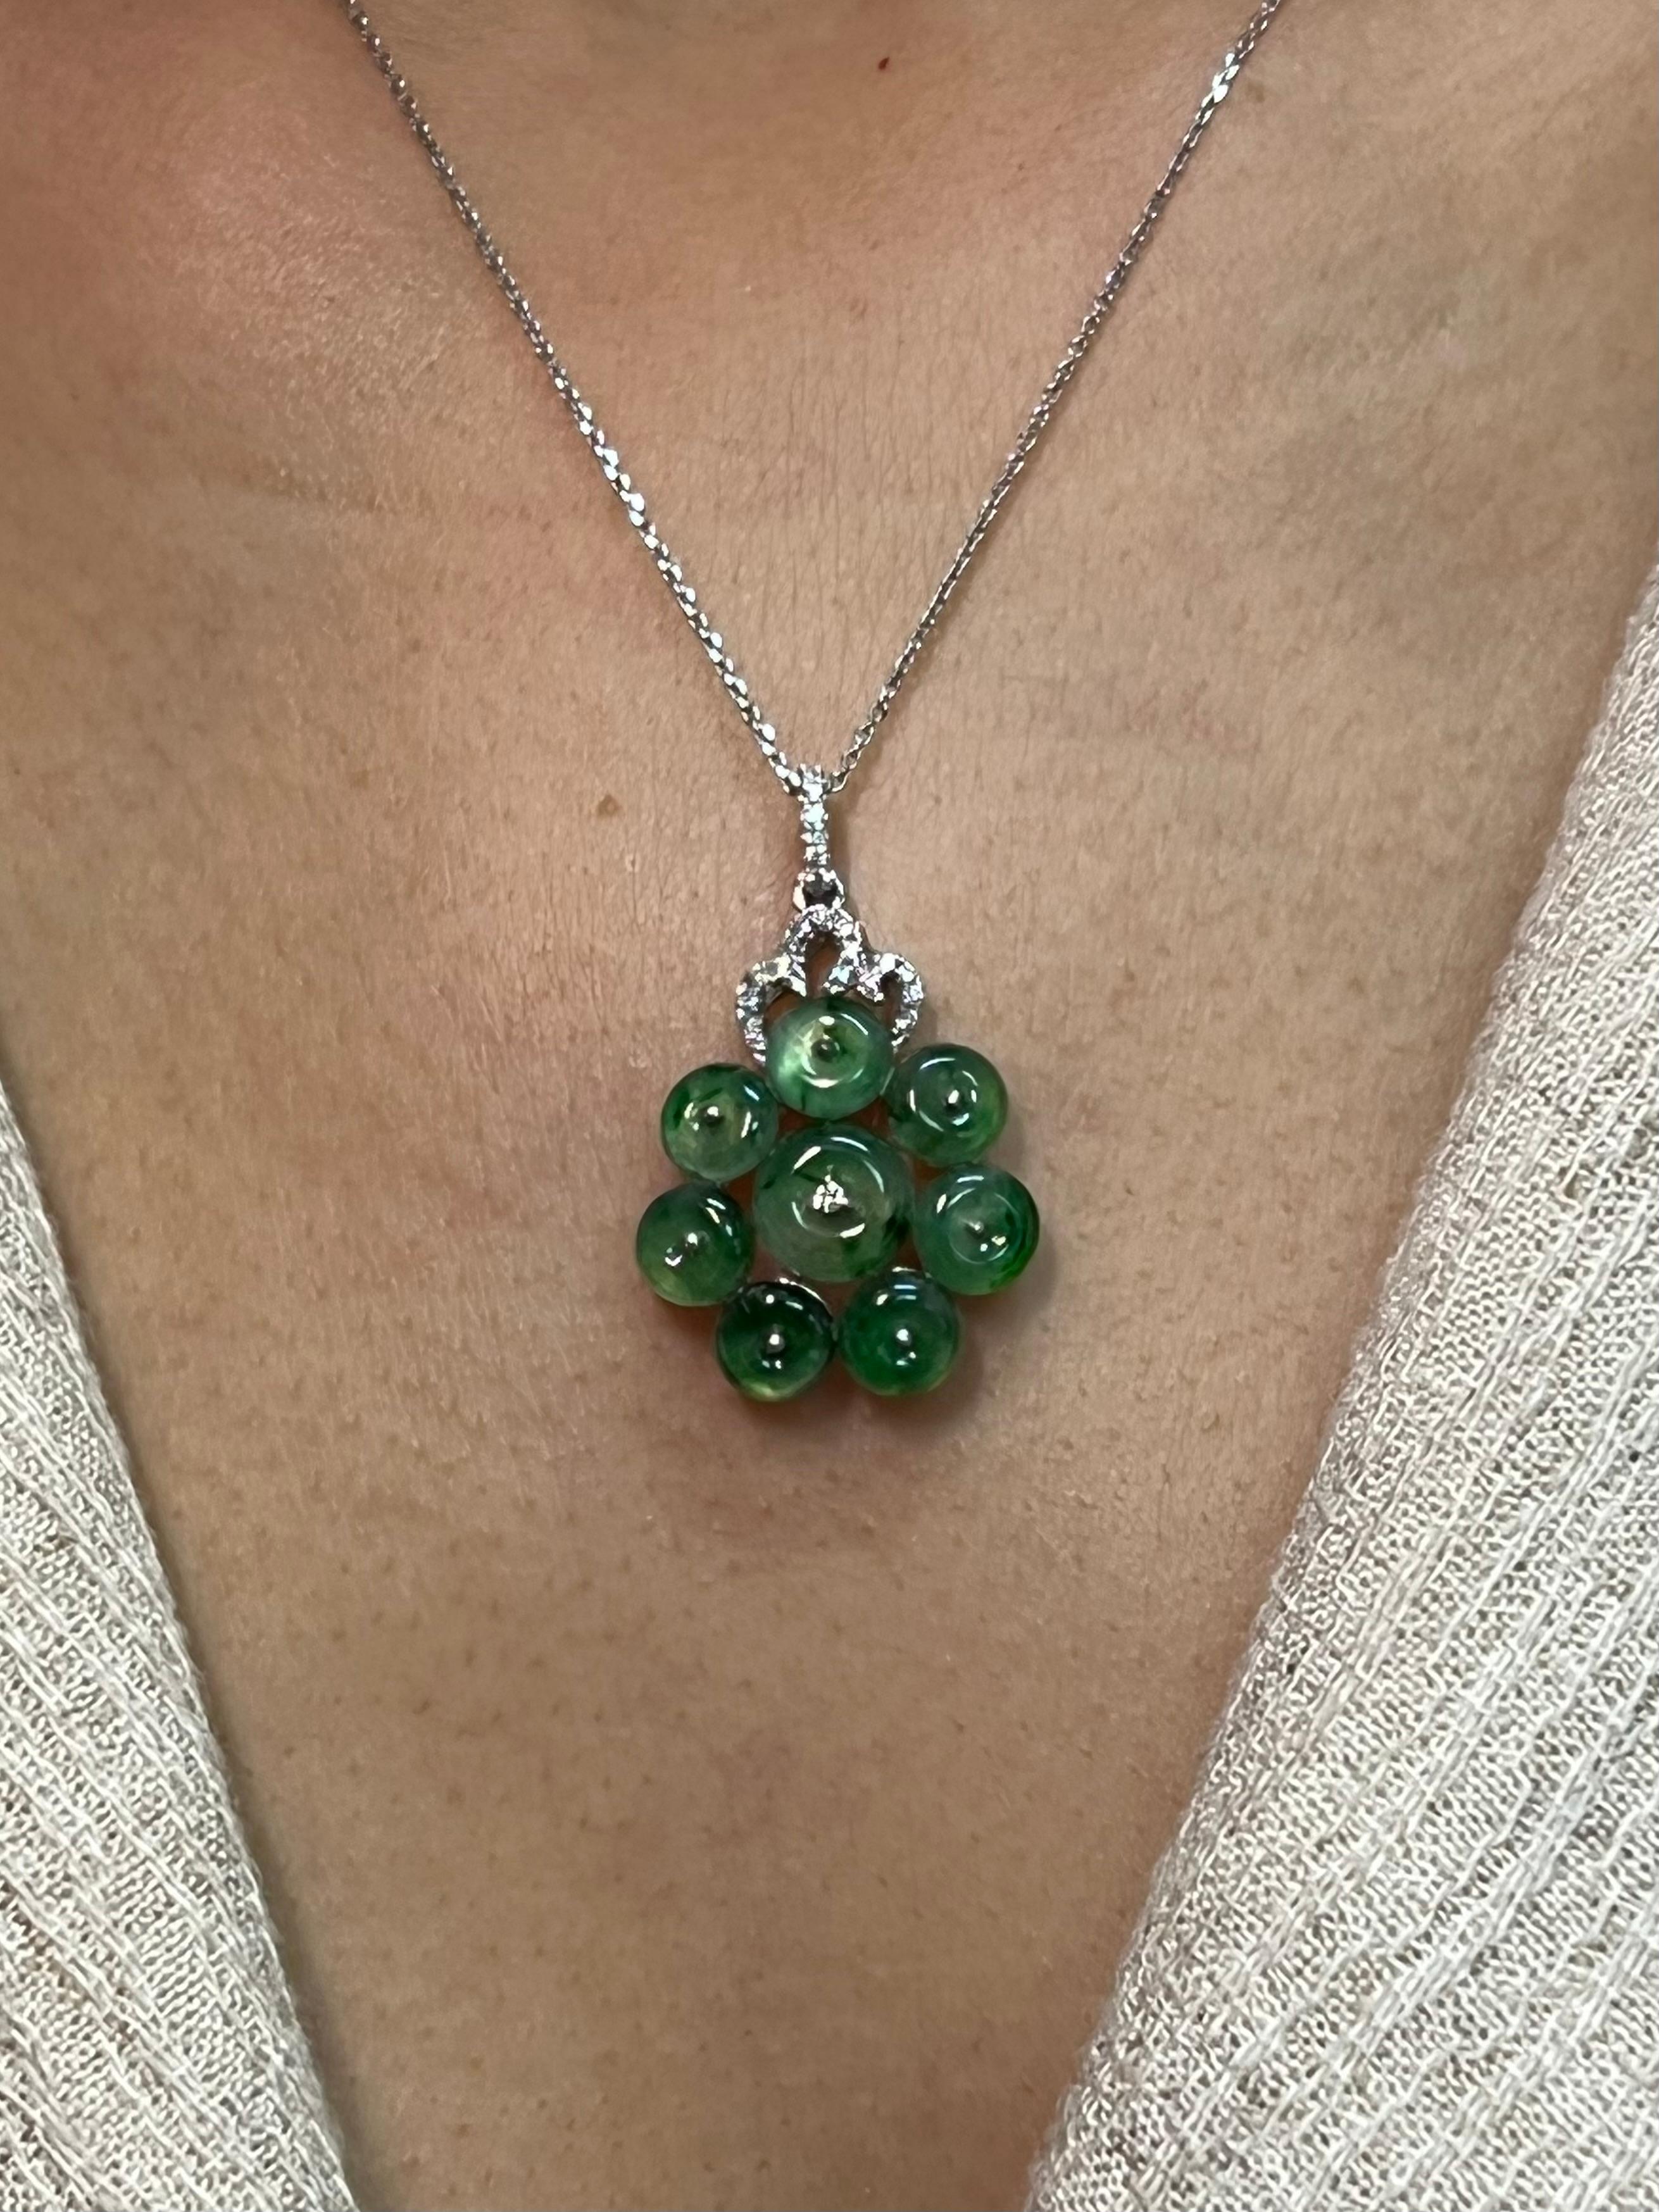 Please check out the HD video! Here is a nice cluster Jade flower pendant. The diameter of the jade part is about 19mm each. The total length the pendant is about 3.1cm. The pendant is set in 18k white gold and diamonds. There are 23 white diamonds